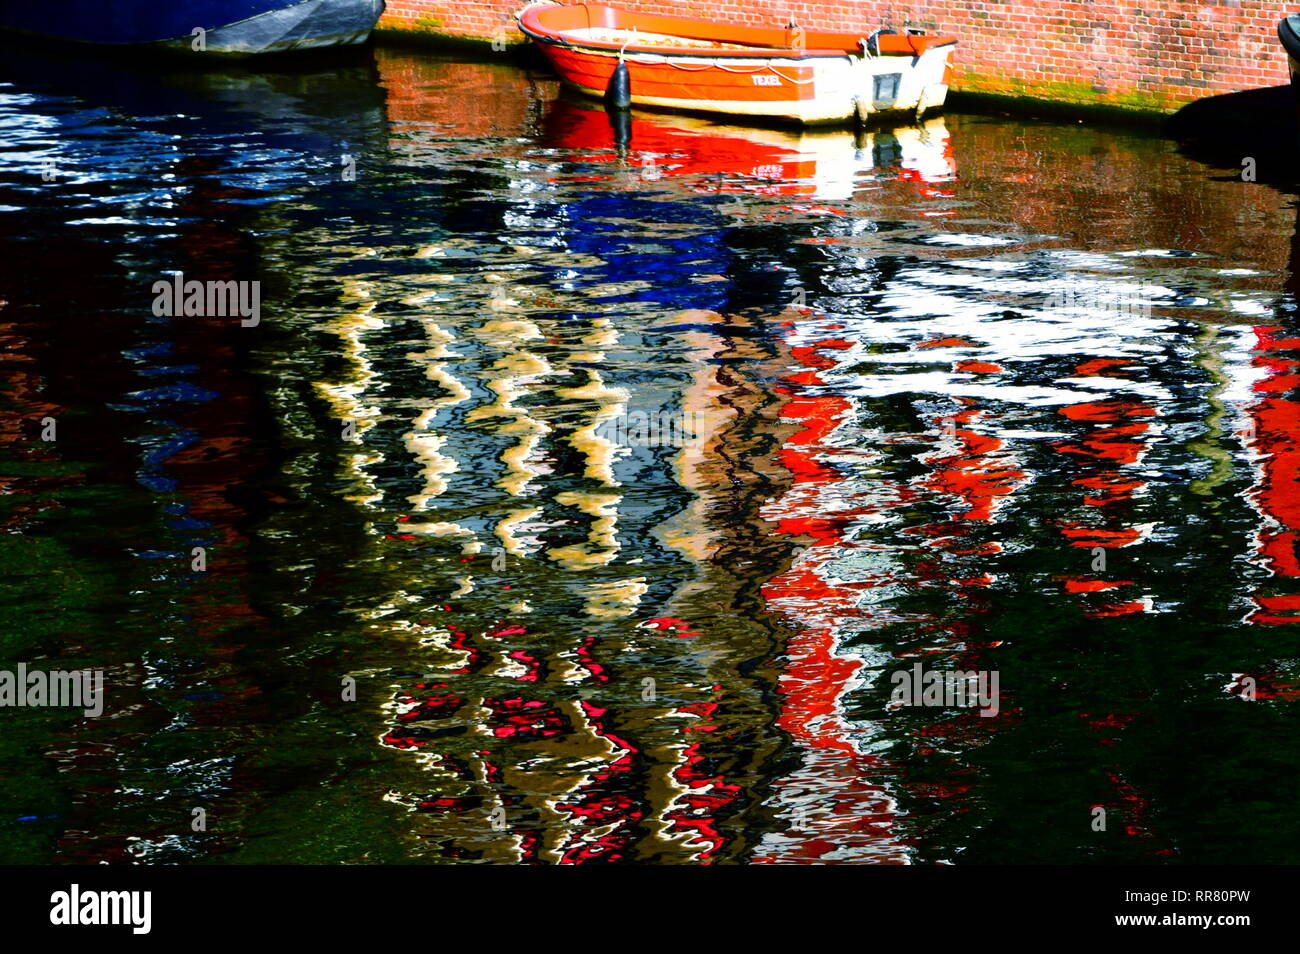 amsterdam - house reflections on canal water Stock Photo